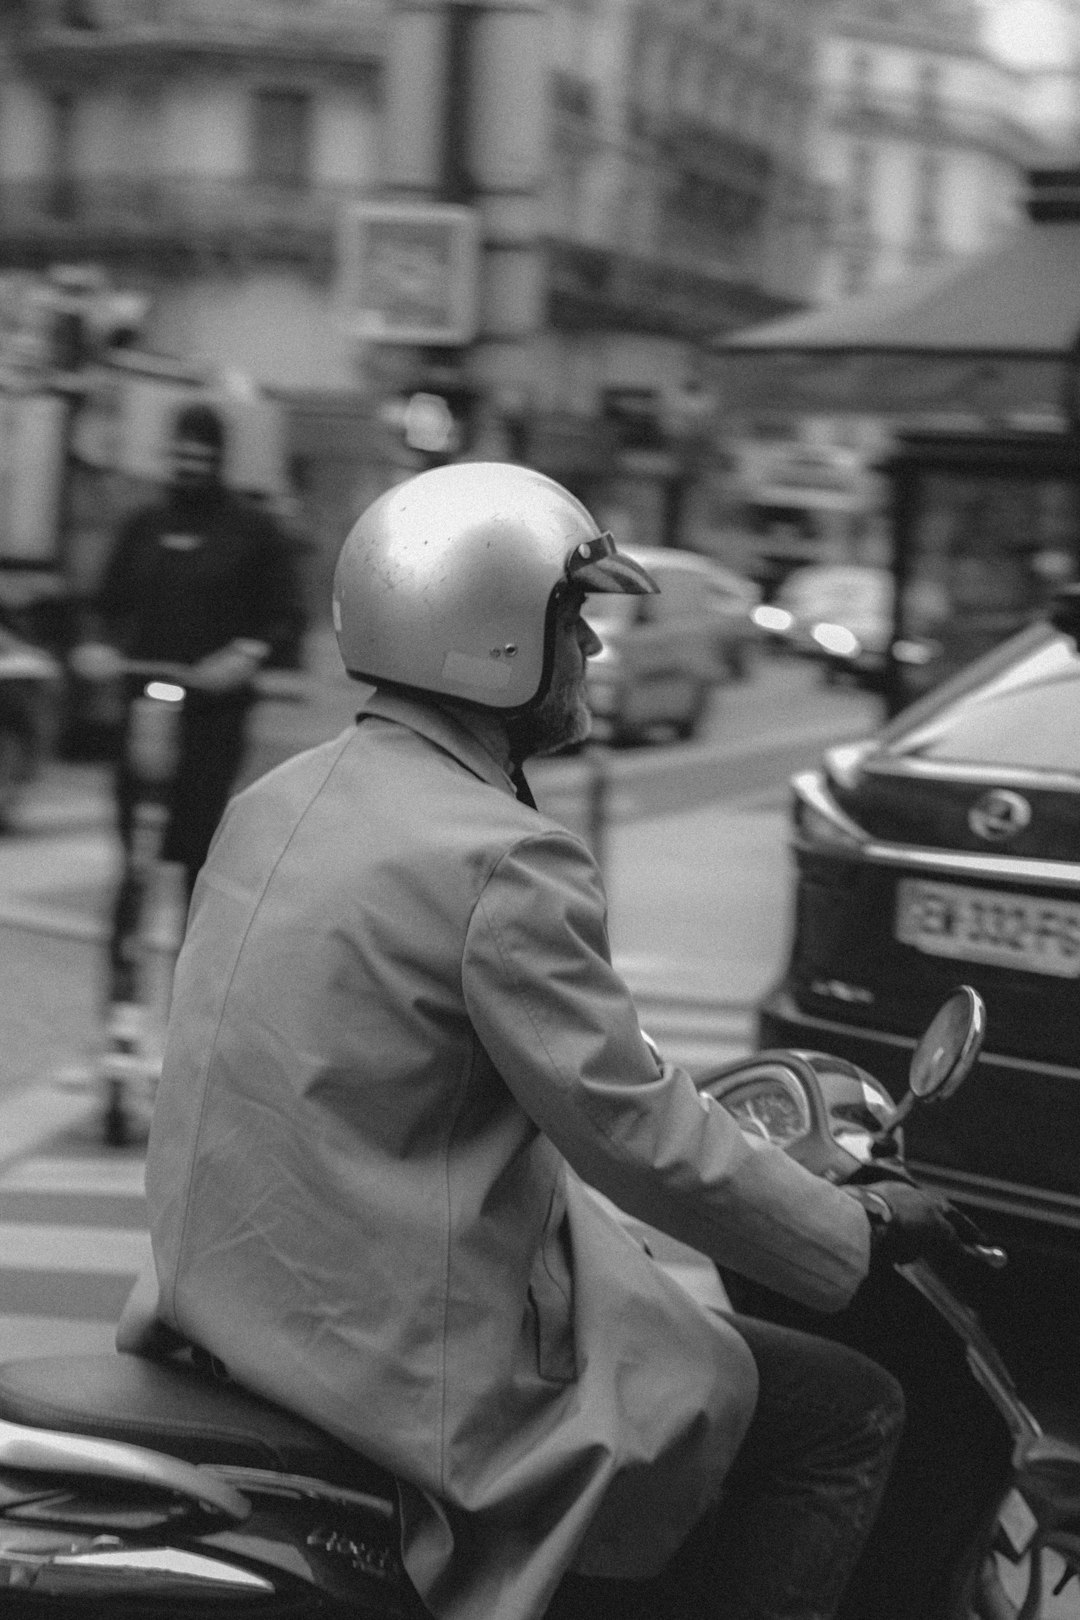 grayscale photo of man in gray coat and helmet riding motorcycle